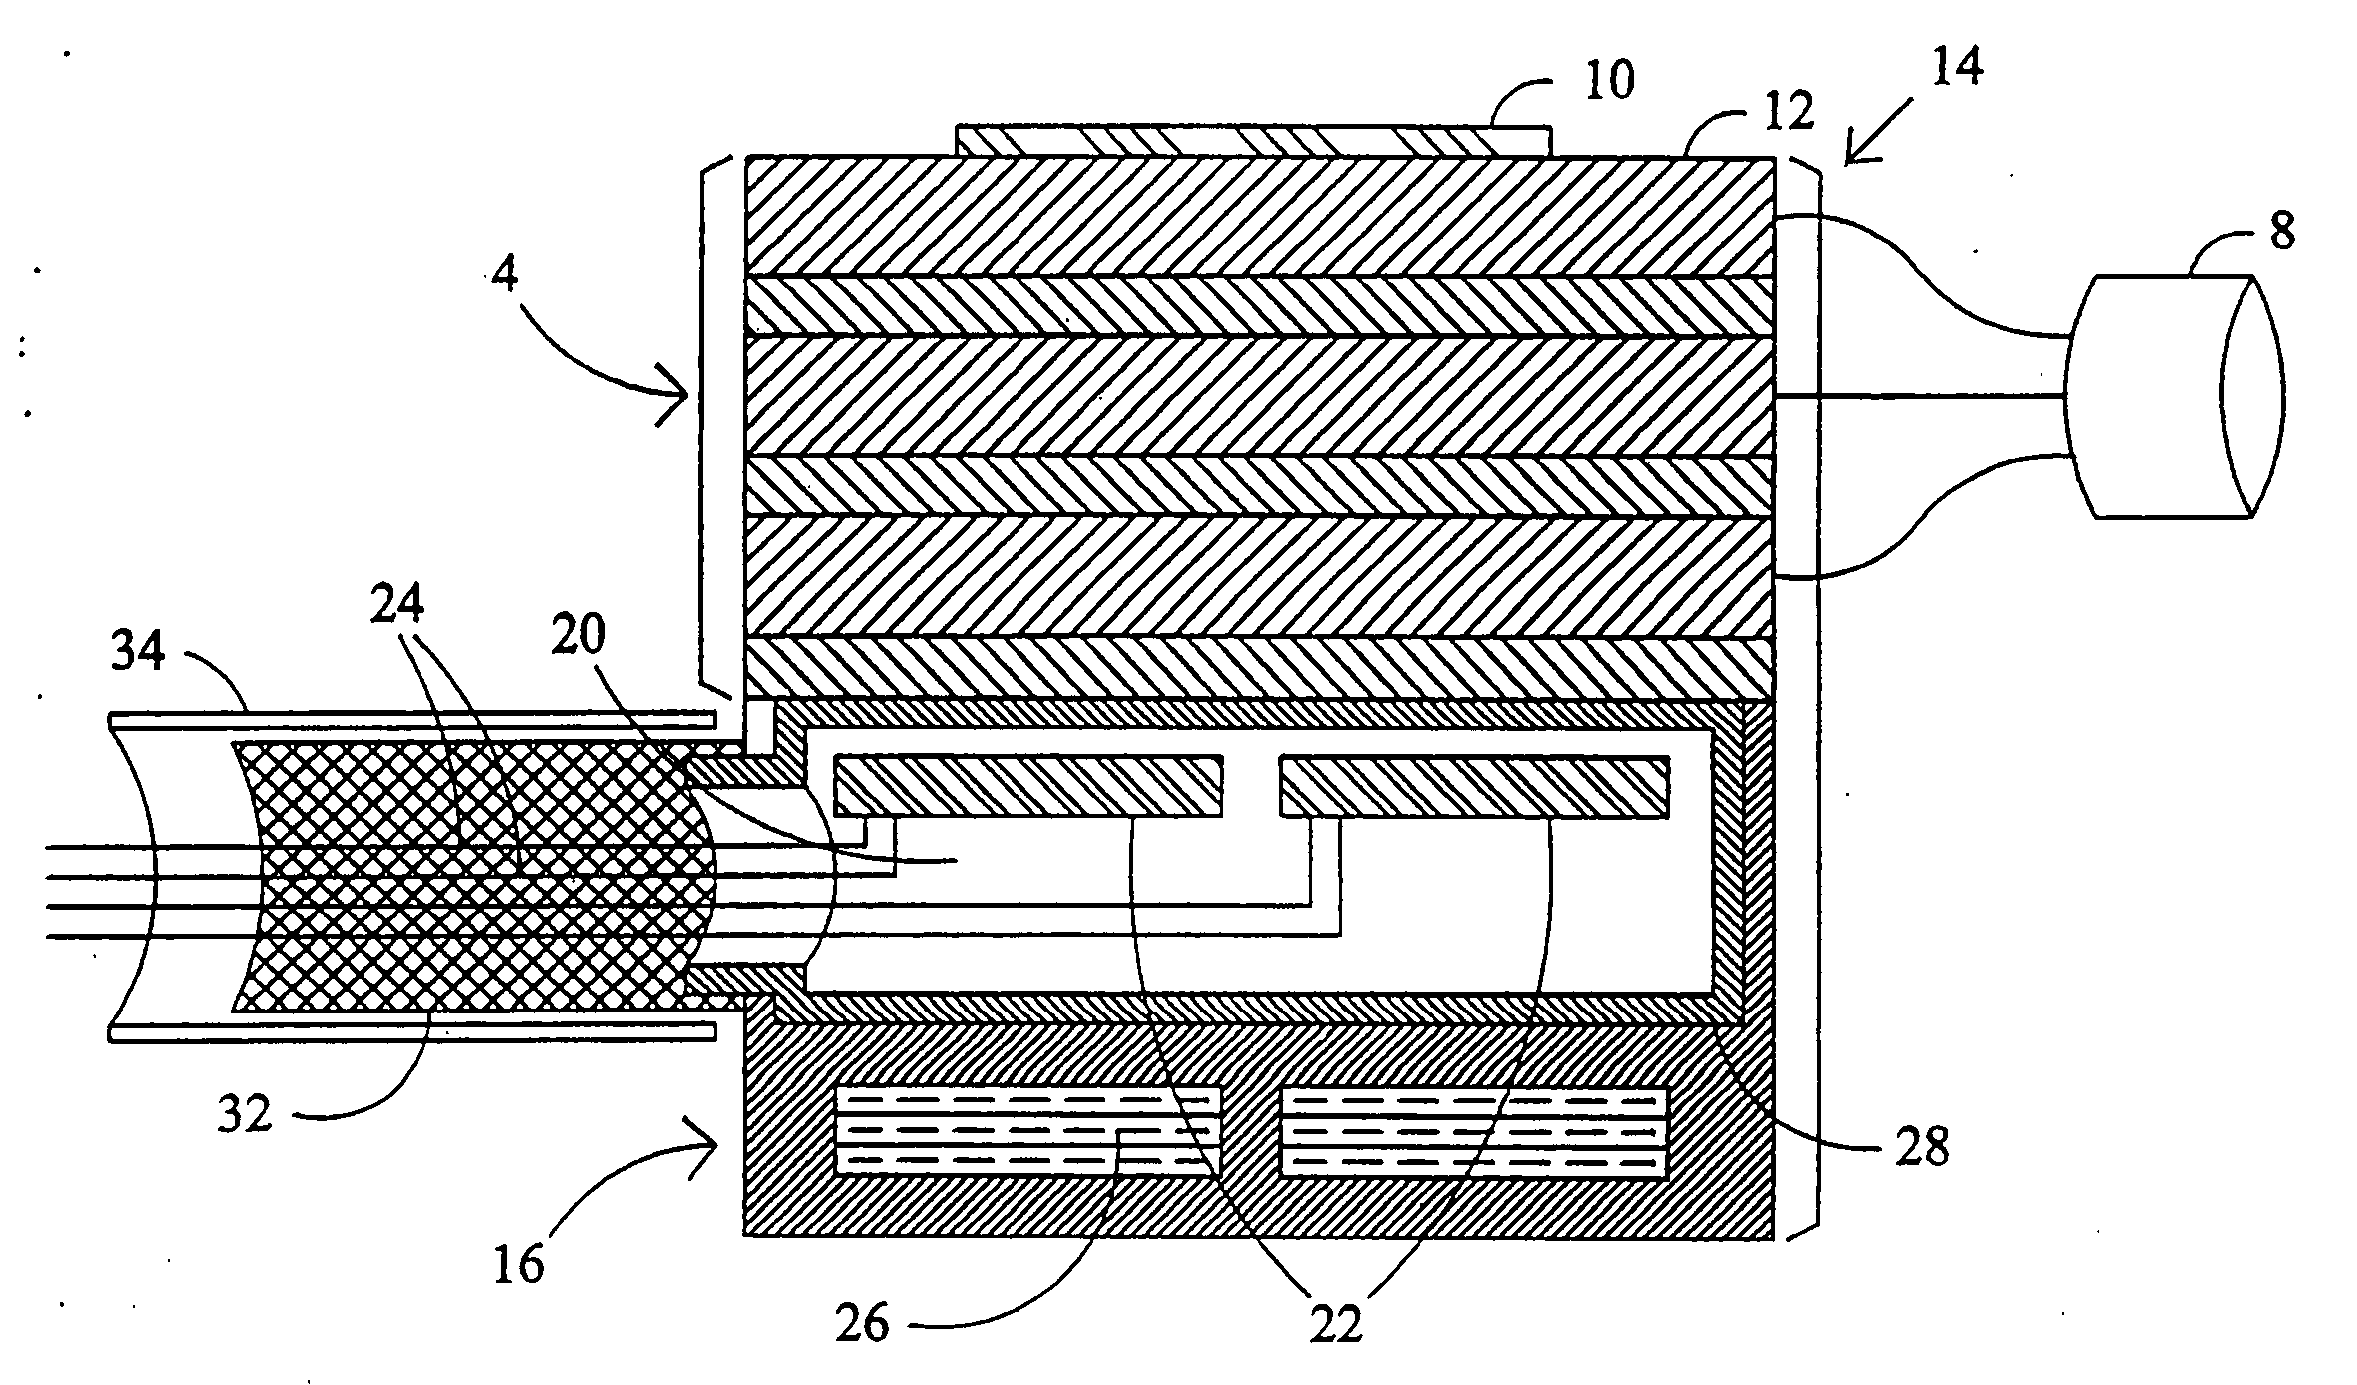 Probe station thermal chuck with shielding for capacitive current